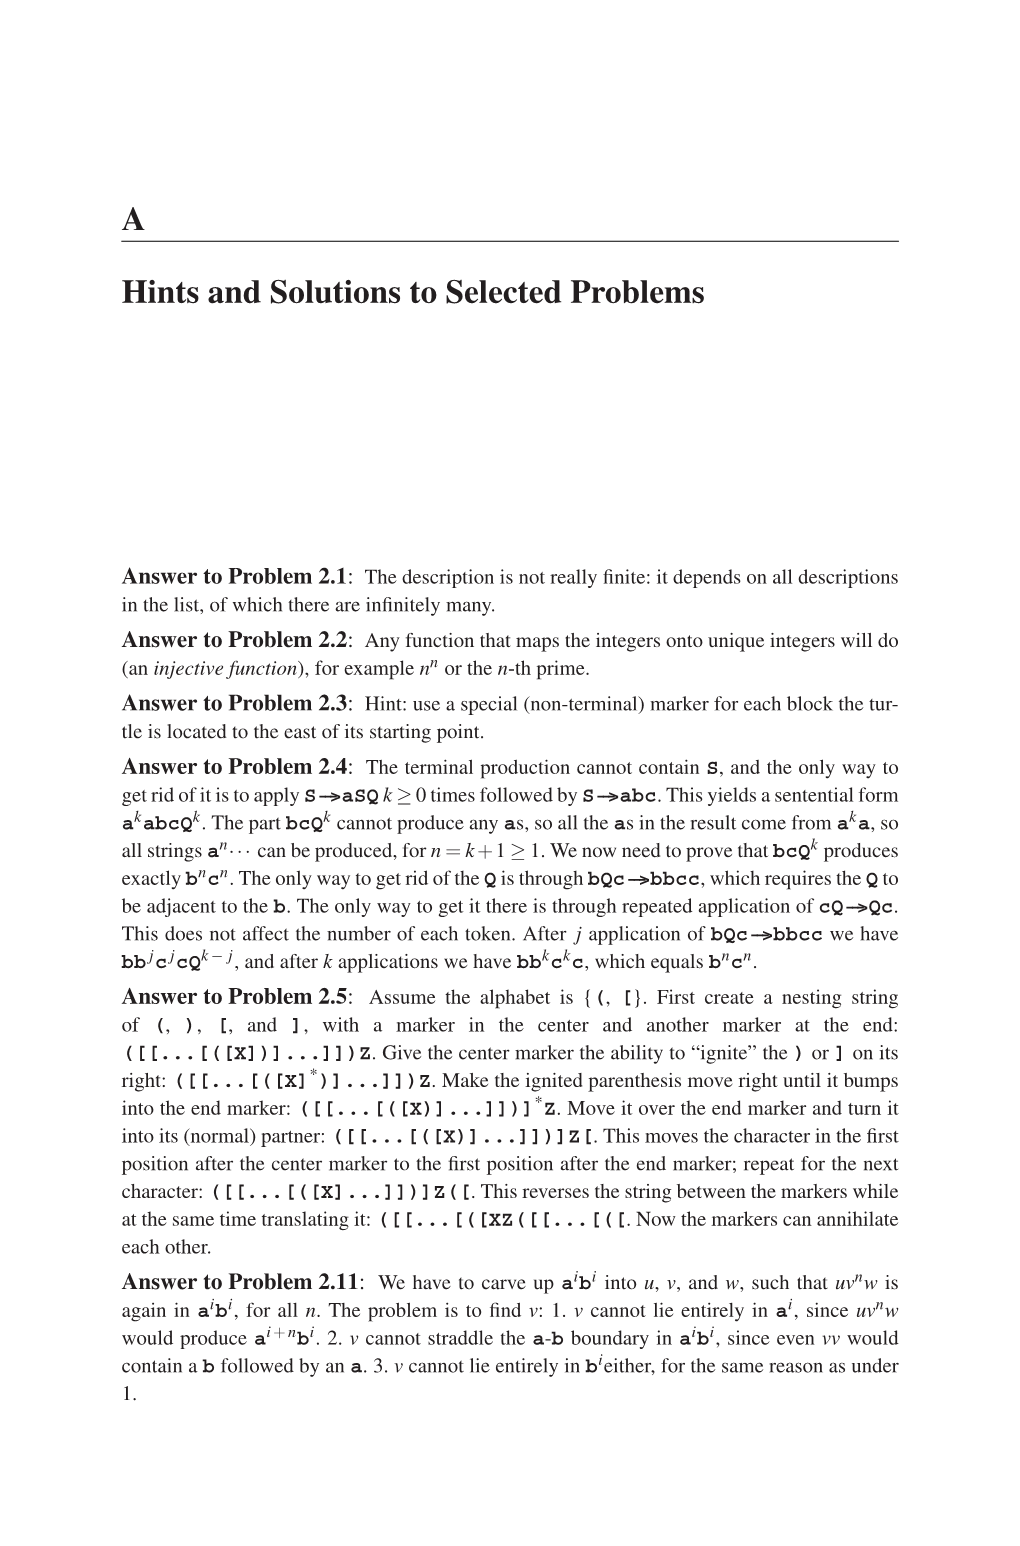 A Hints and Solutions to Selected Problems